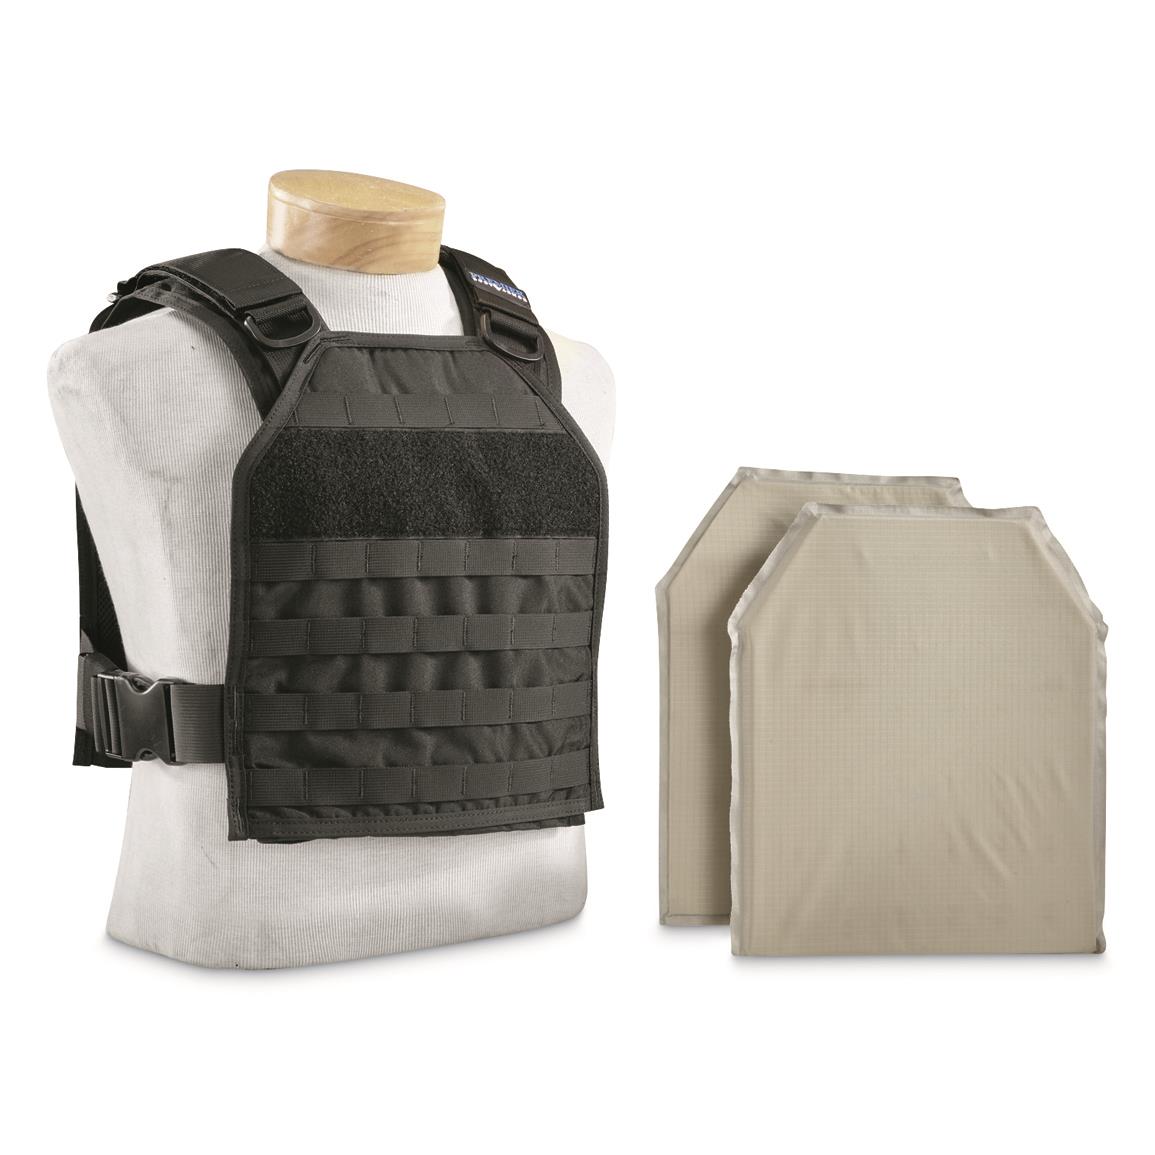 stemning bande Interessant Premier Classic Plate Carrier Vest with (2) Level IIIA 10x12" Soft Armor  Panels - 720493, Armor Plate & Carrier Sets at Sportsman's Guide